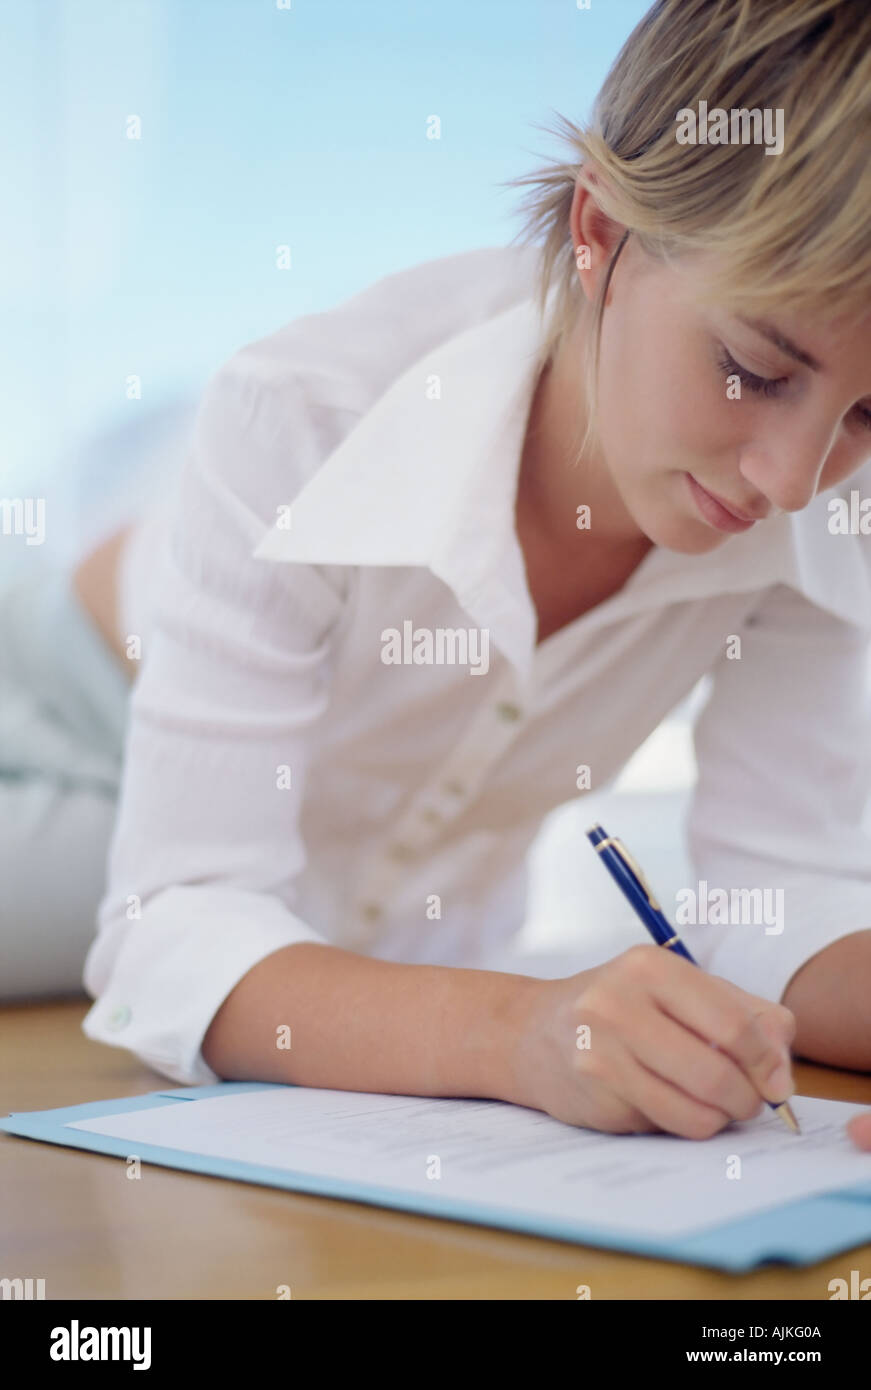 Woman filling in a form Stock Photo